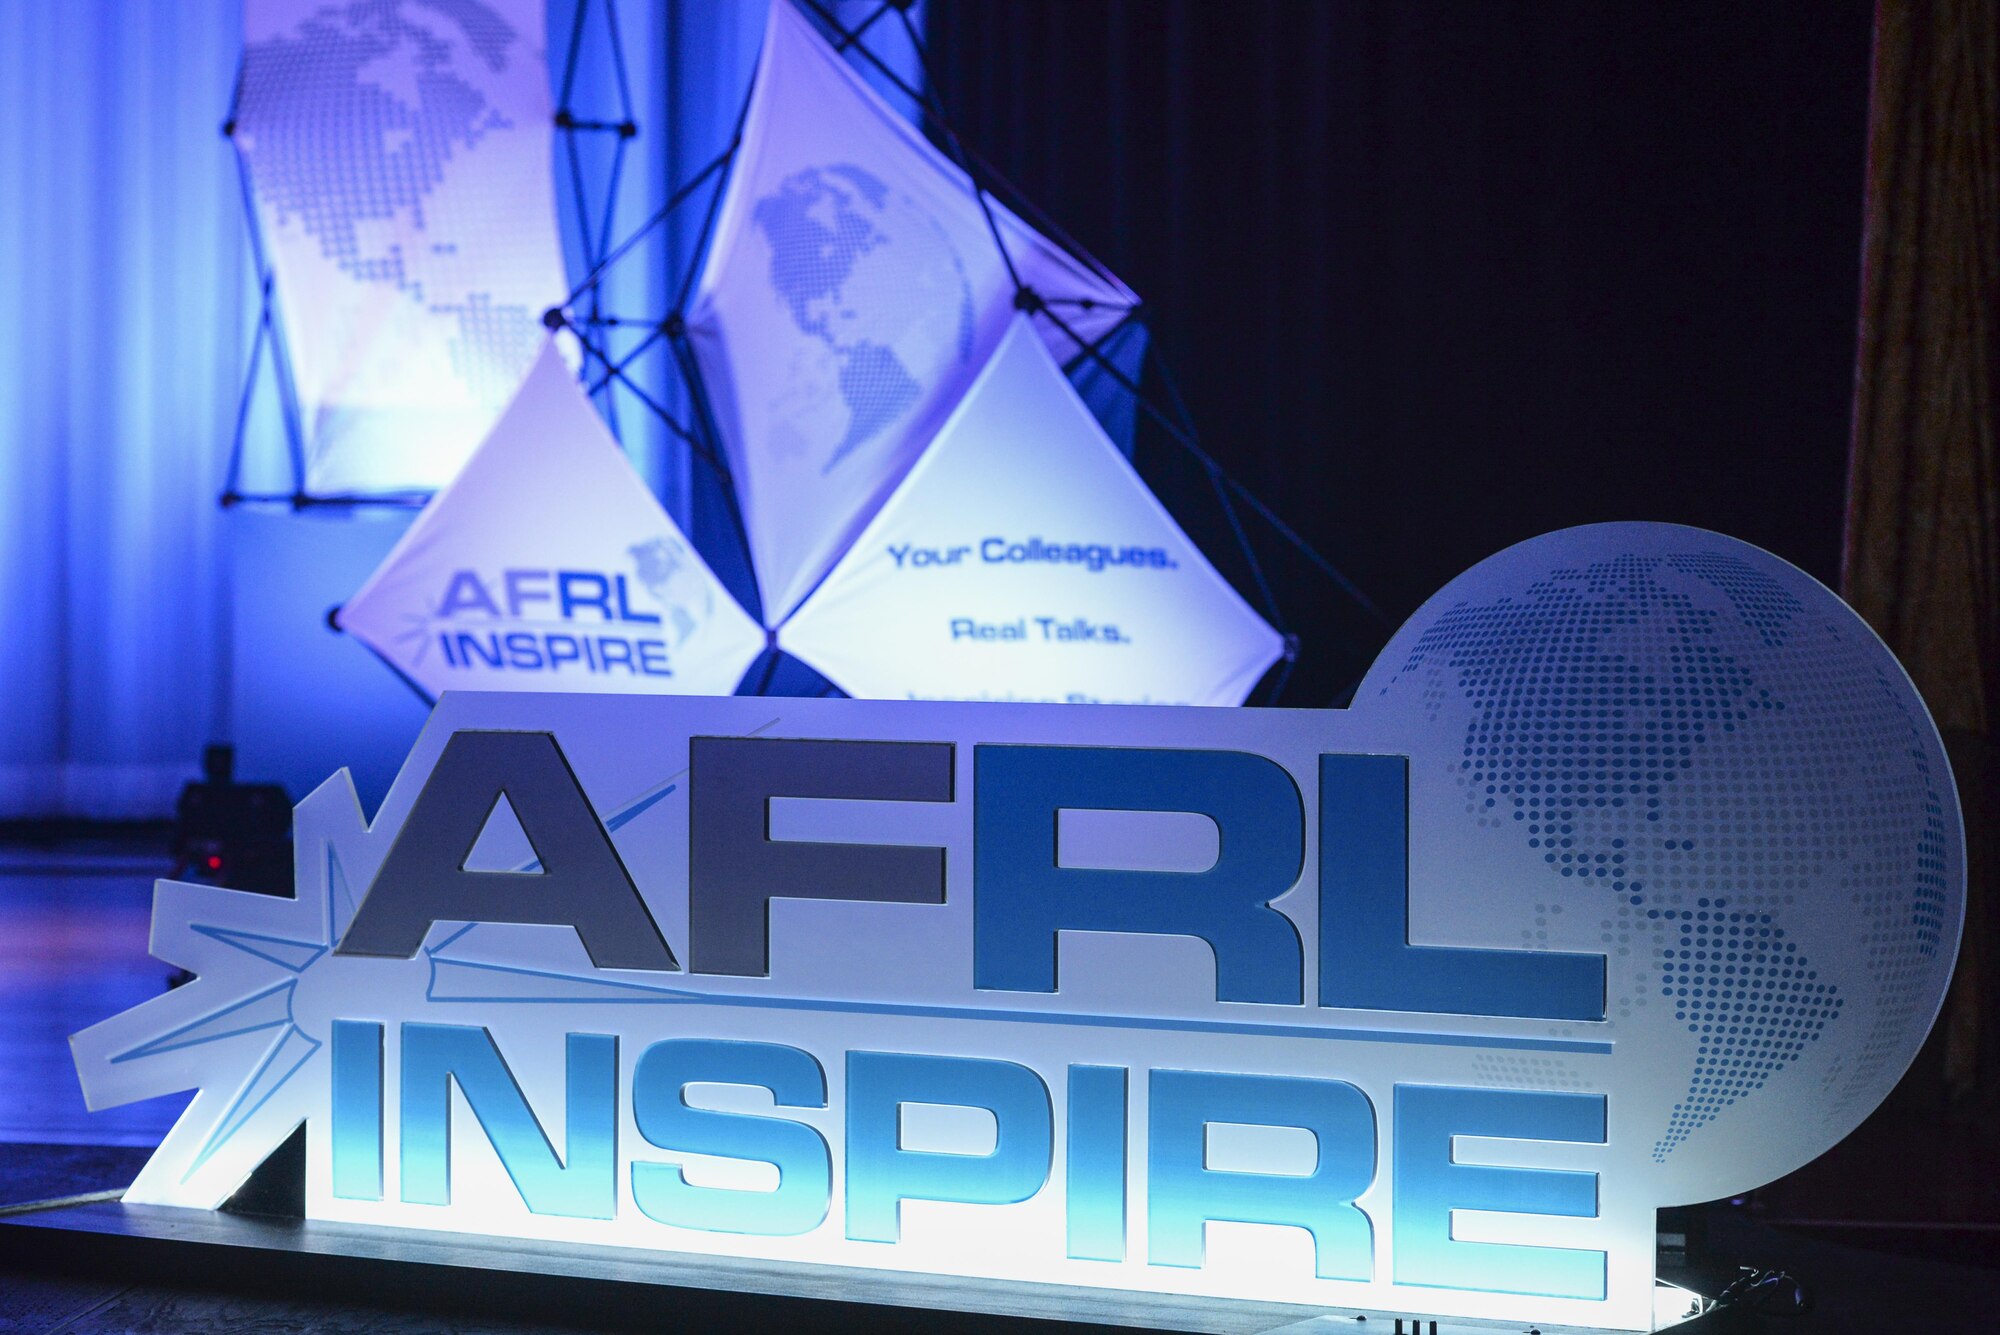 The second annual AFRL Inspire event was held Oct. 26, 2016 at the Dayton Art Institute and was attended by nearly 500 research scientists and engineers. (U.S. Air Force photo/Wesley Farnsworth)